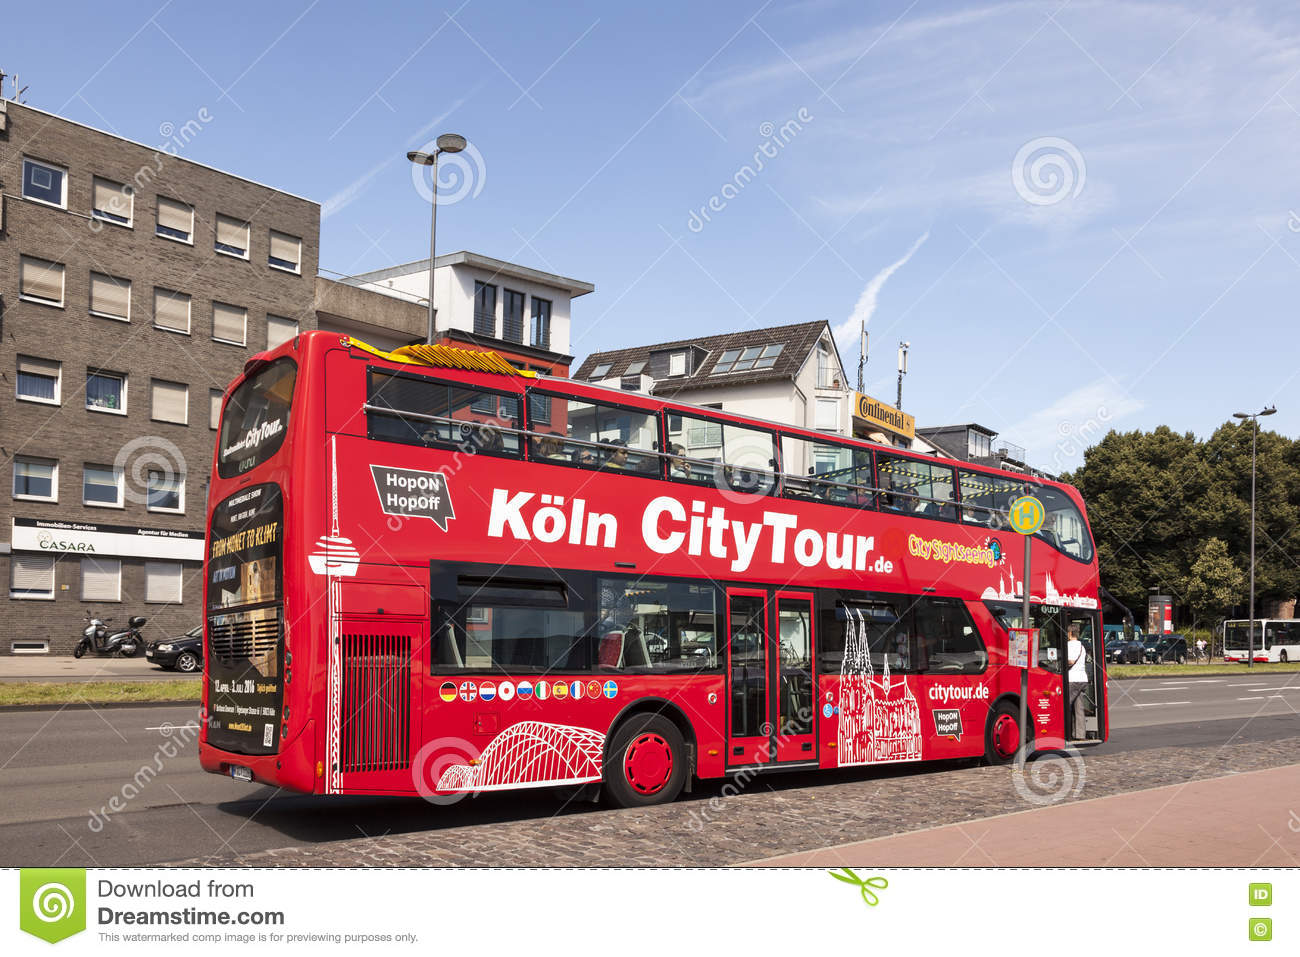 Cologne red bus.jpg